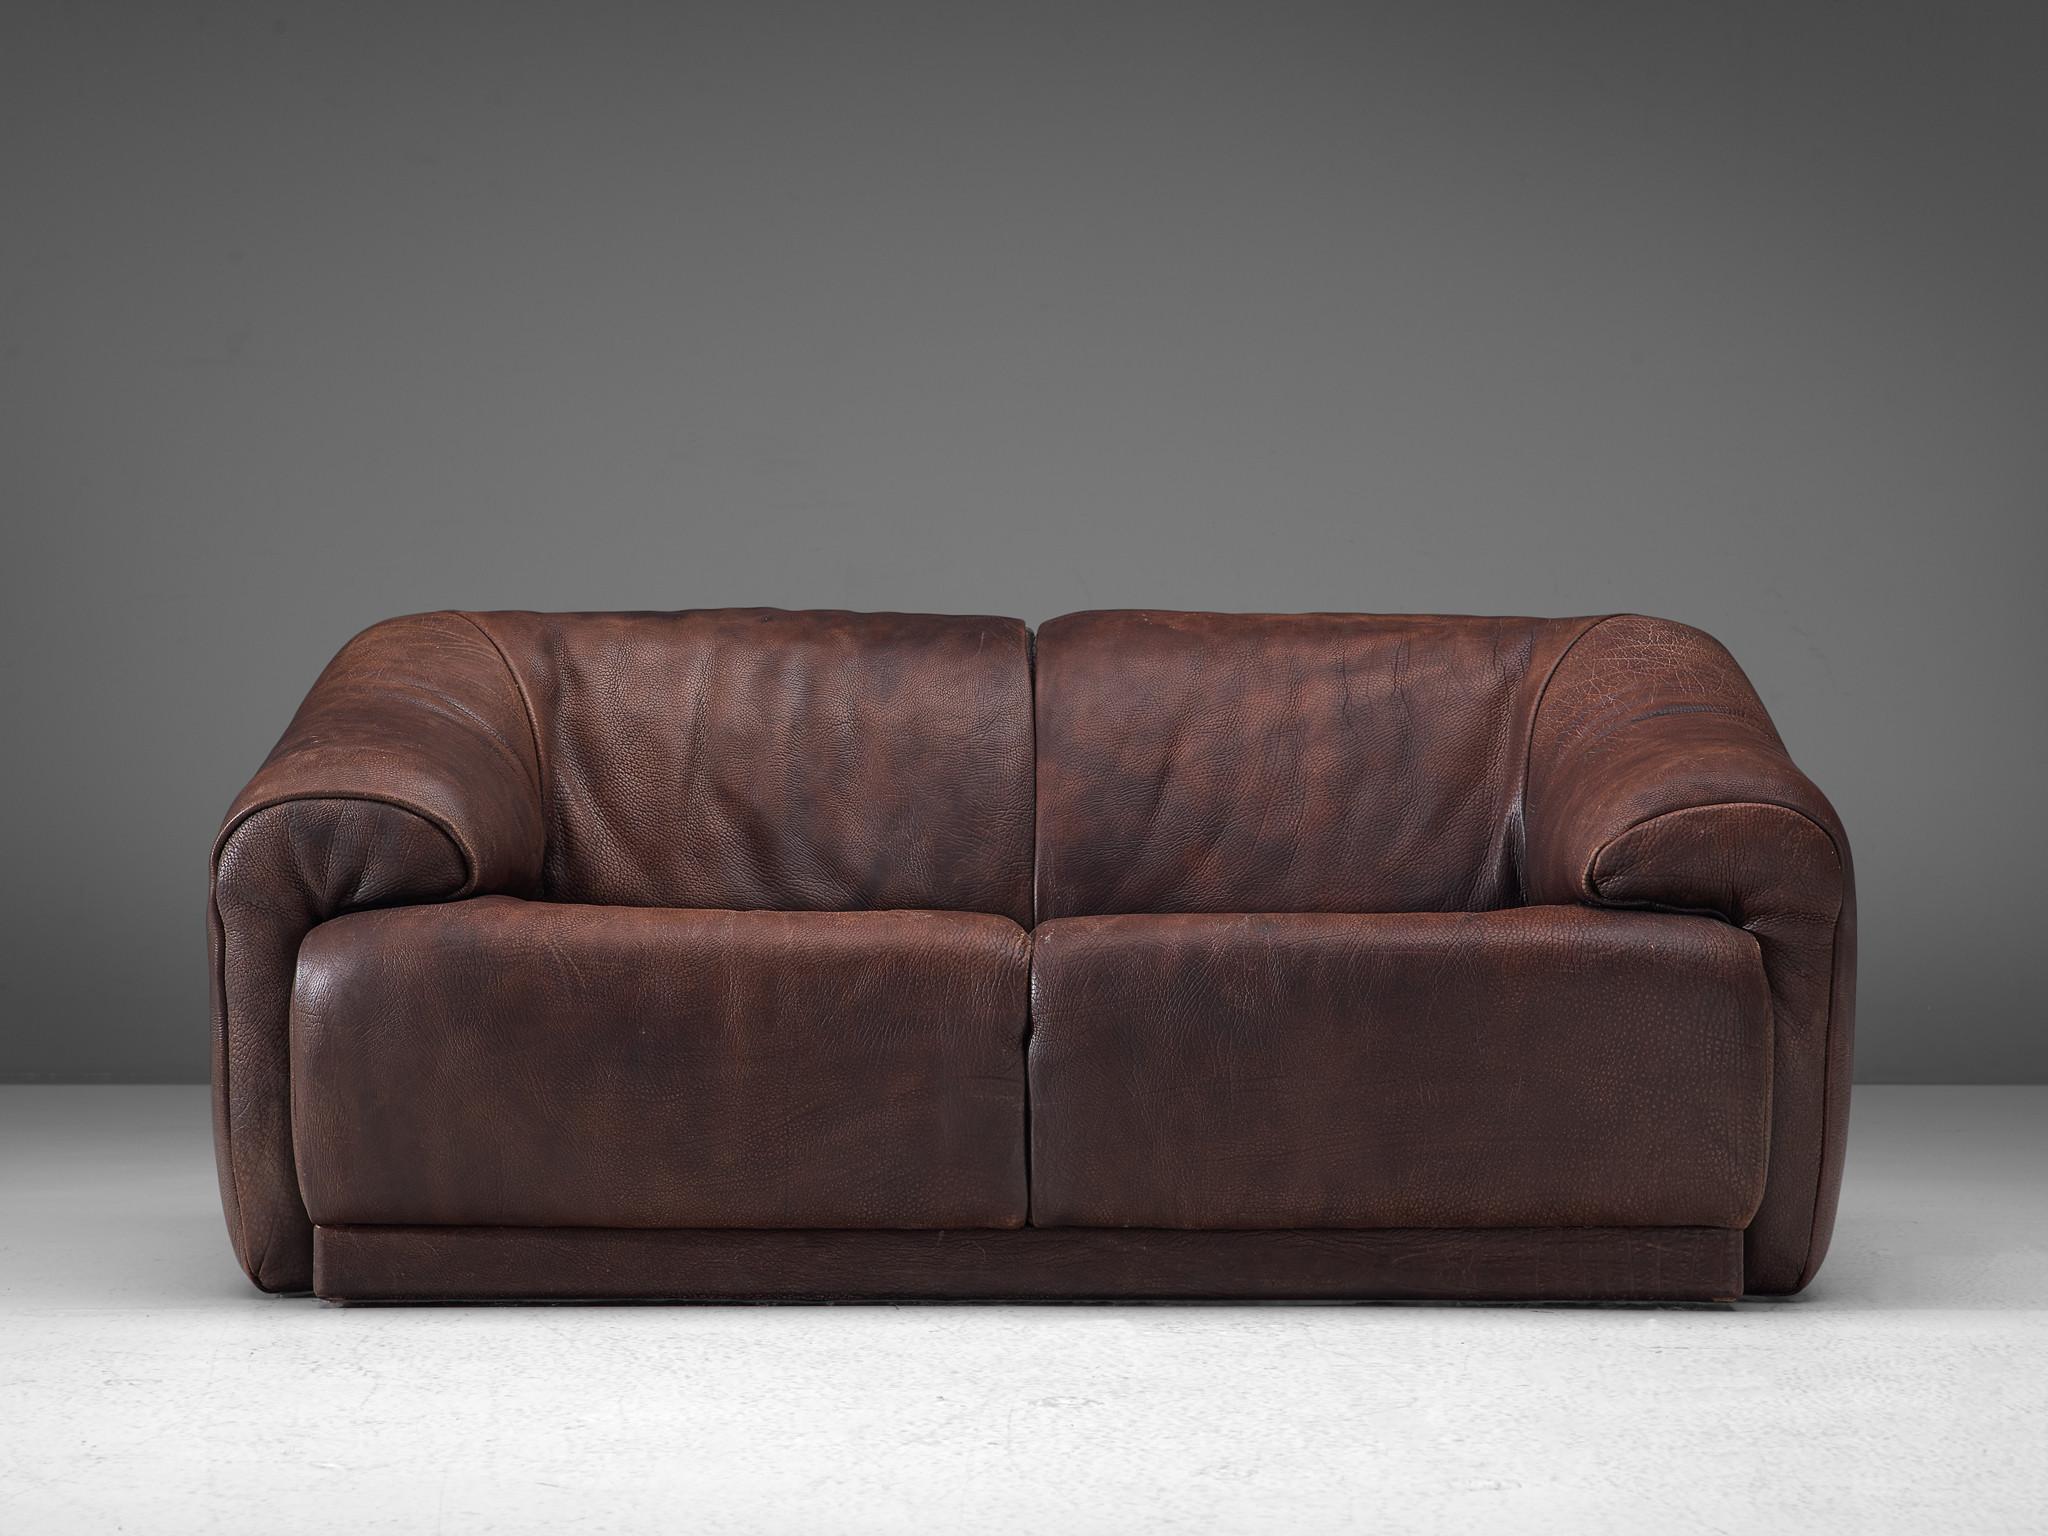 De Sede, sofa, leather, Switzerland, circa 1970.

This model is characterized by a voluminous, round seat whose armrests run diagonally from the backrest. This piece of furniture is designed to provide an ultimate level of comfort due to the thick